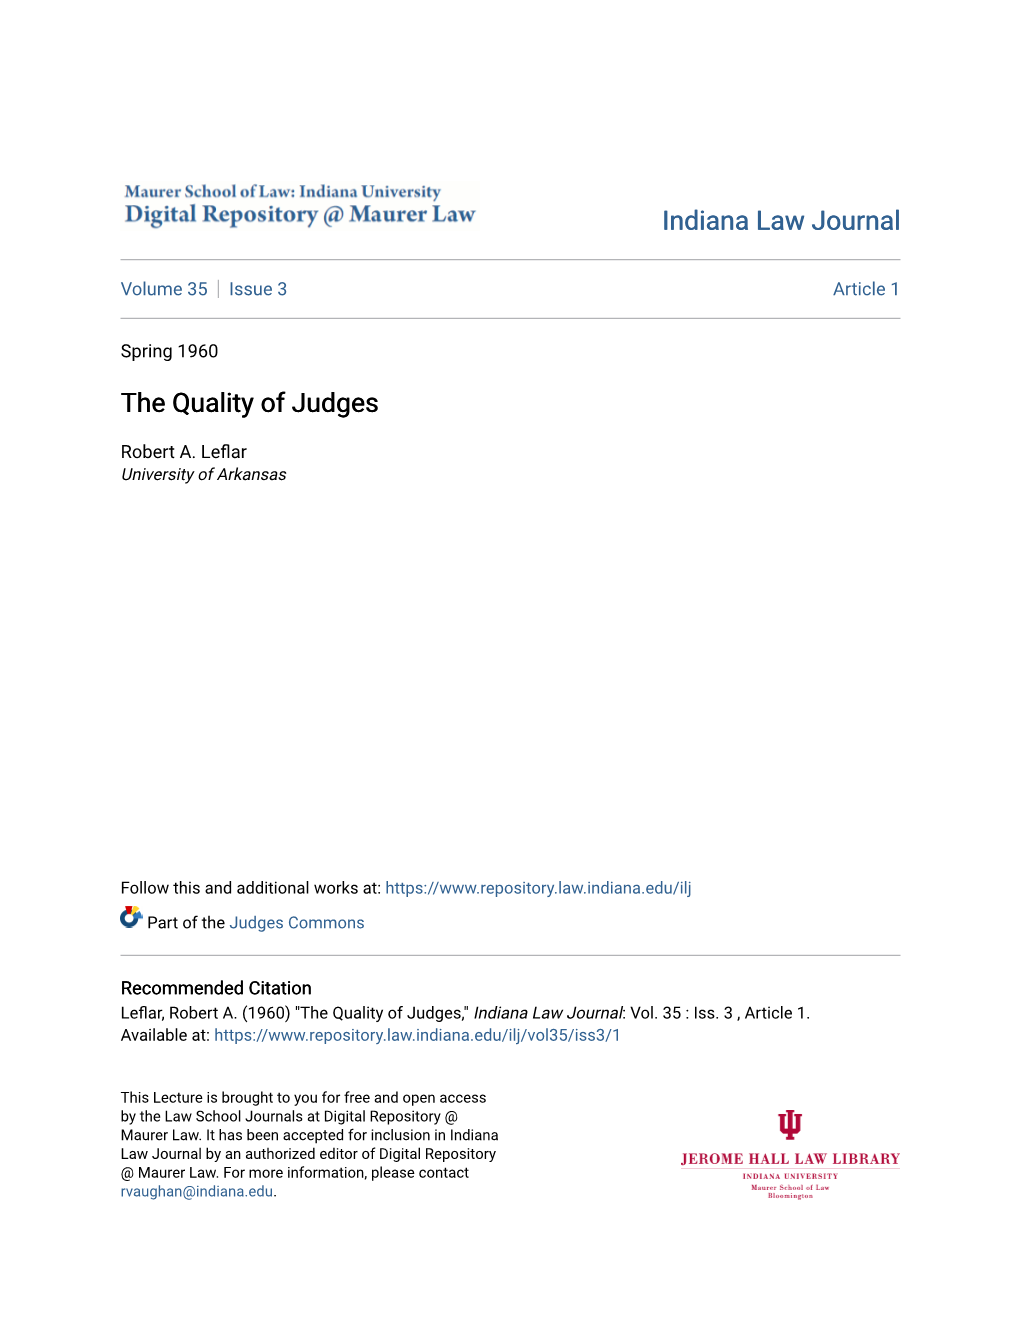 The Quality of Judges